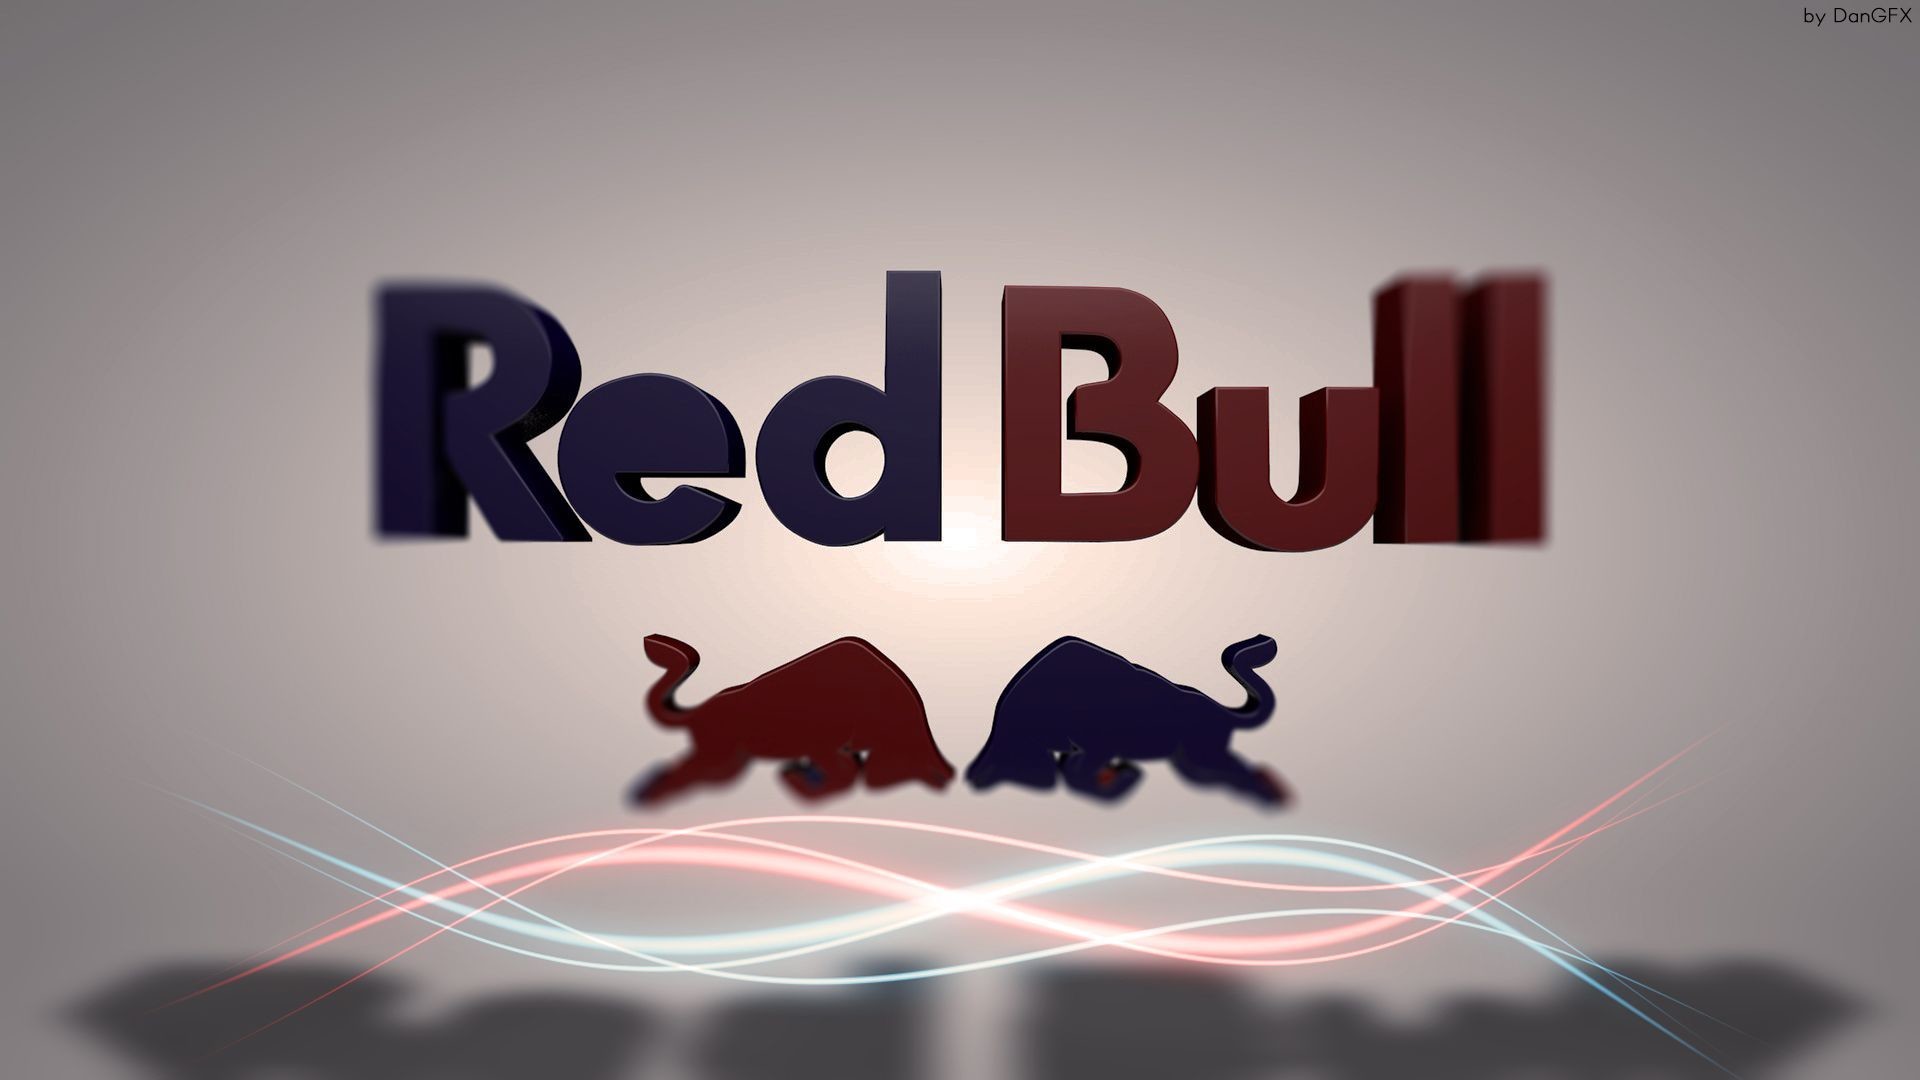 Red Bull Logo Drawing At Paintingvalley Com Explore Collection Of Red Bull Logo Drawing